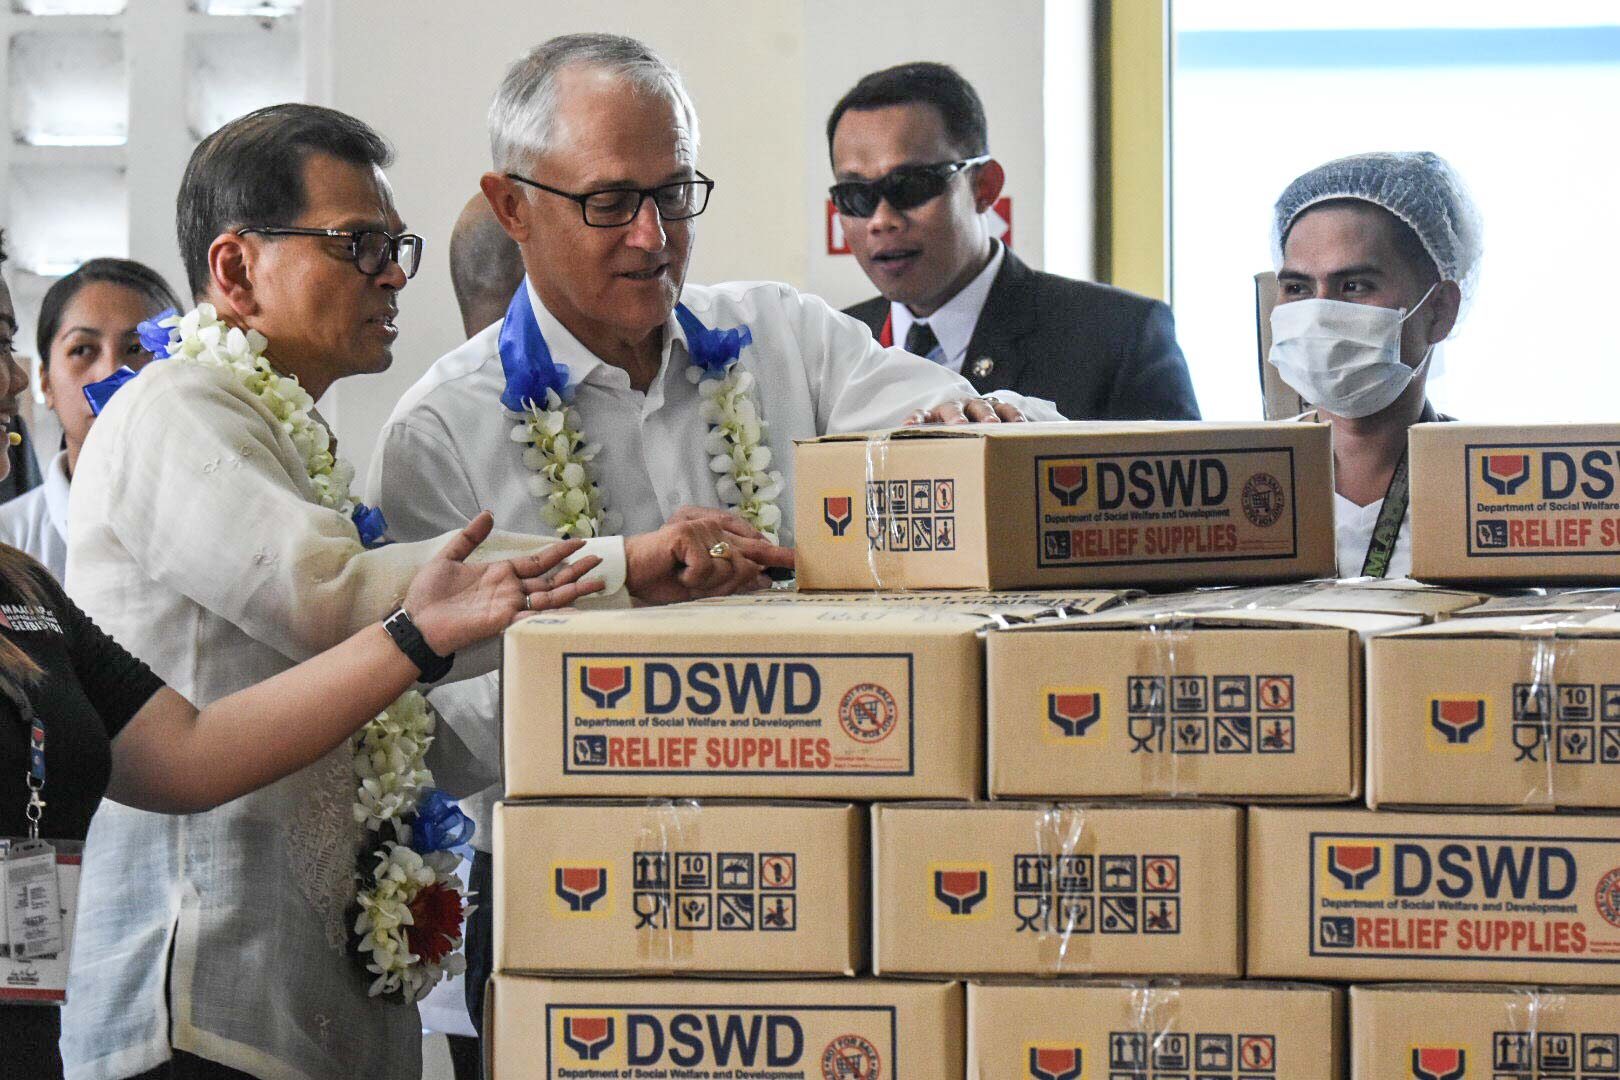 DSWD VISIT. Australian Prime Minister Malcolm Turnbull visits the Department of Social Welfare and Development National Resource Operations Center on November 13, 2017. Photo by Angie de Silva/Rappler 